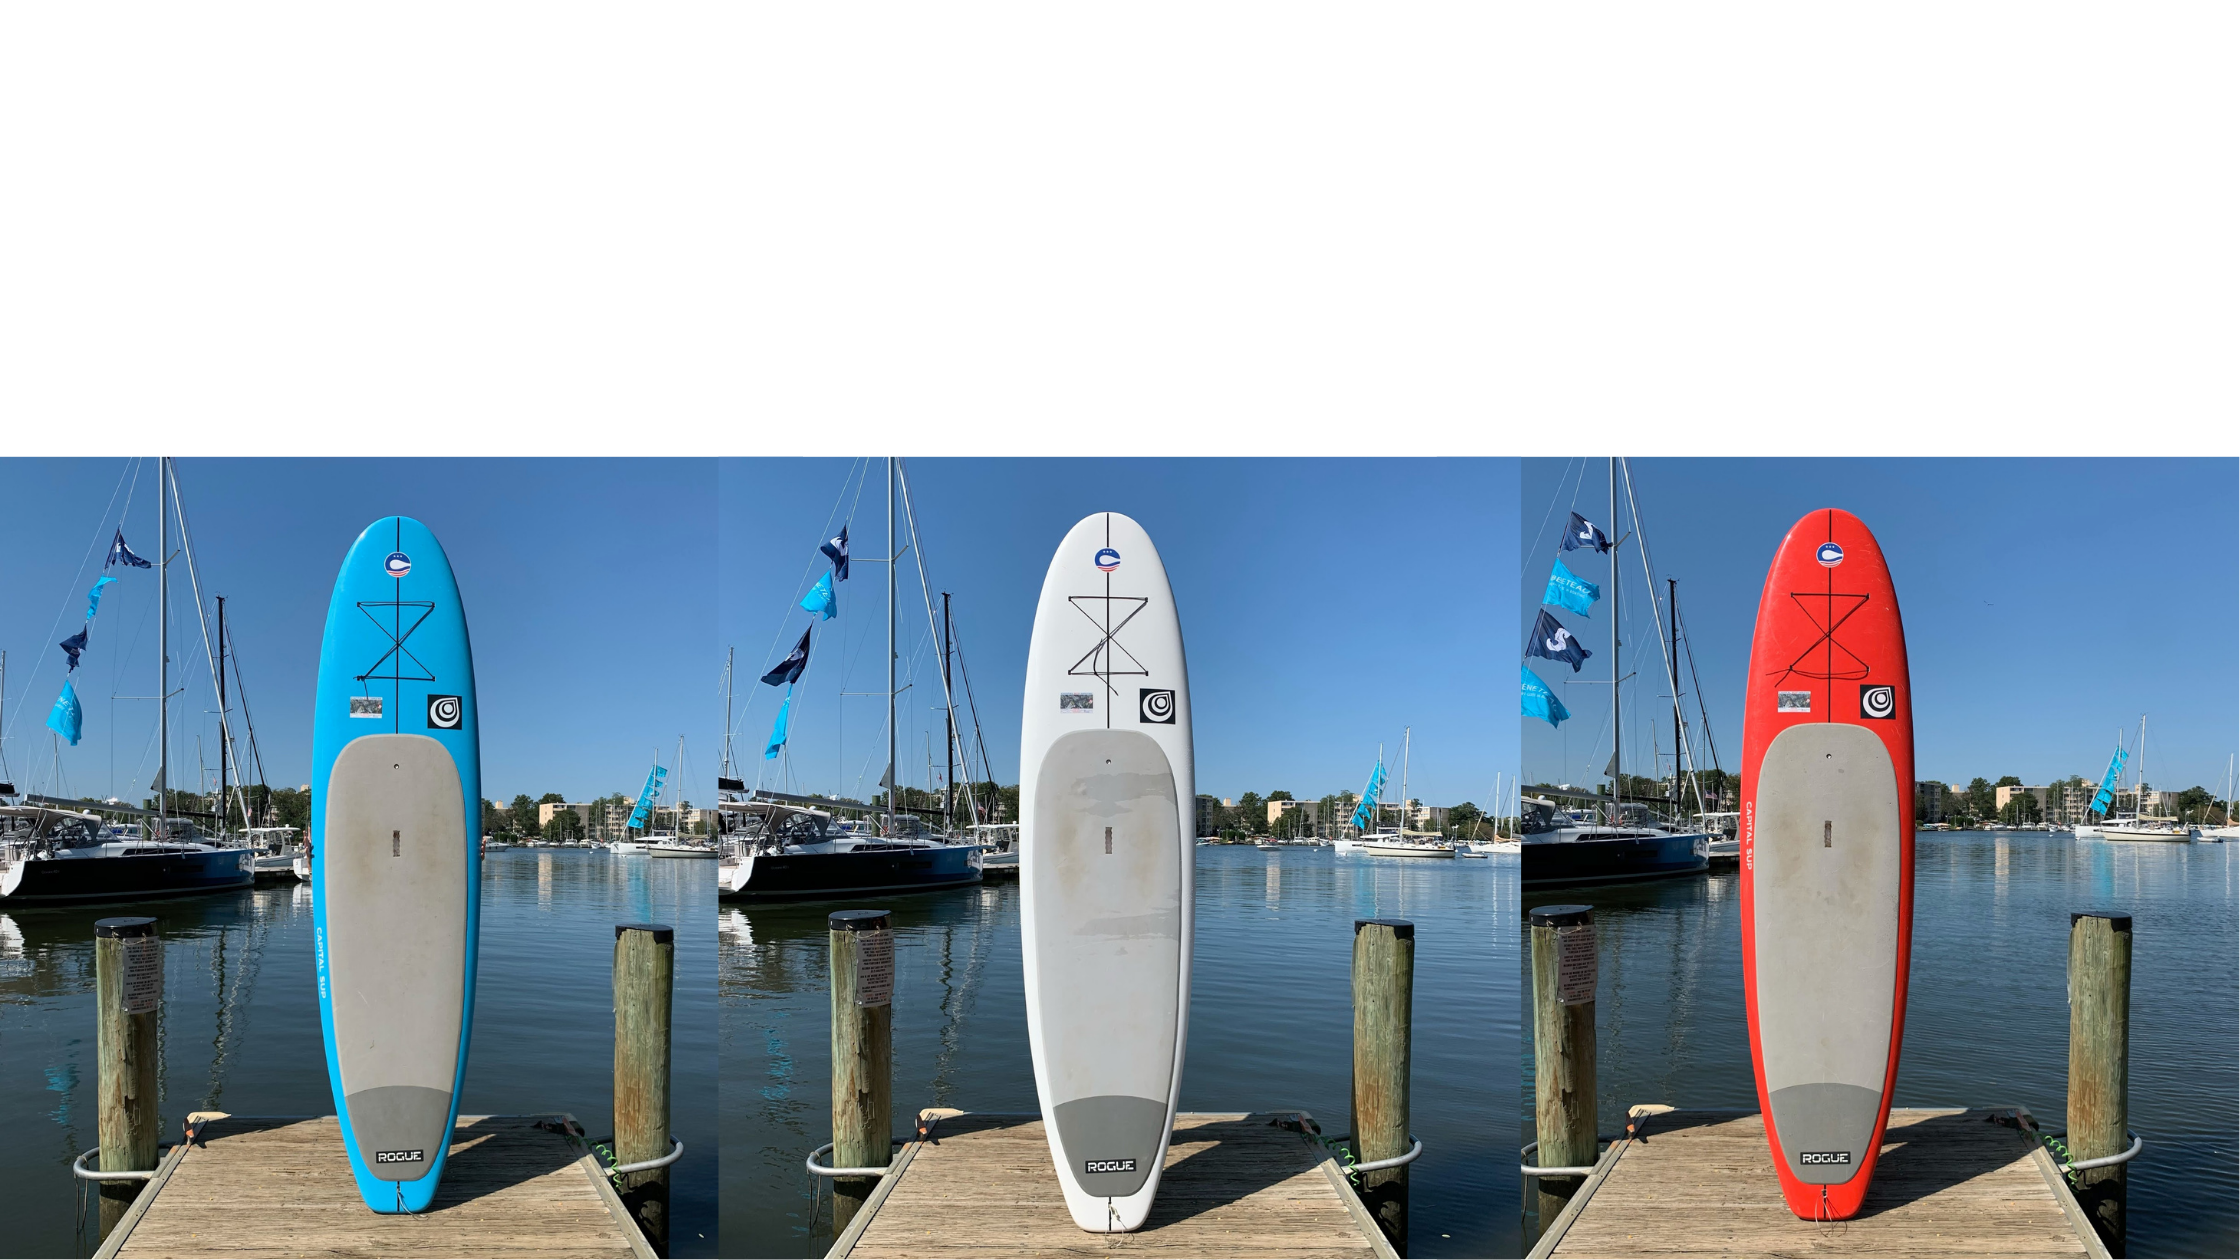 PADDLE BOARD RENTAL BANNER SIGN paddleboard stand up rent sales boats 